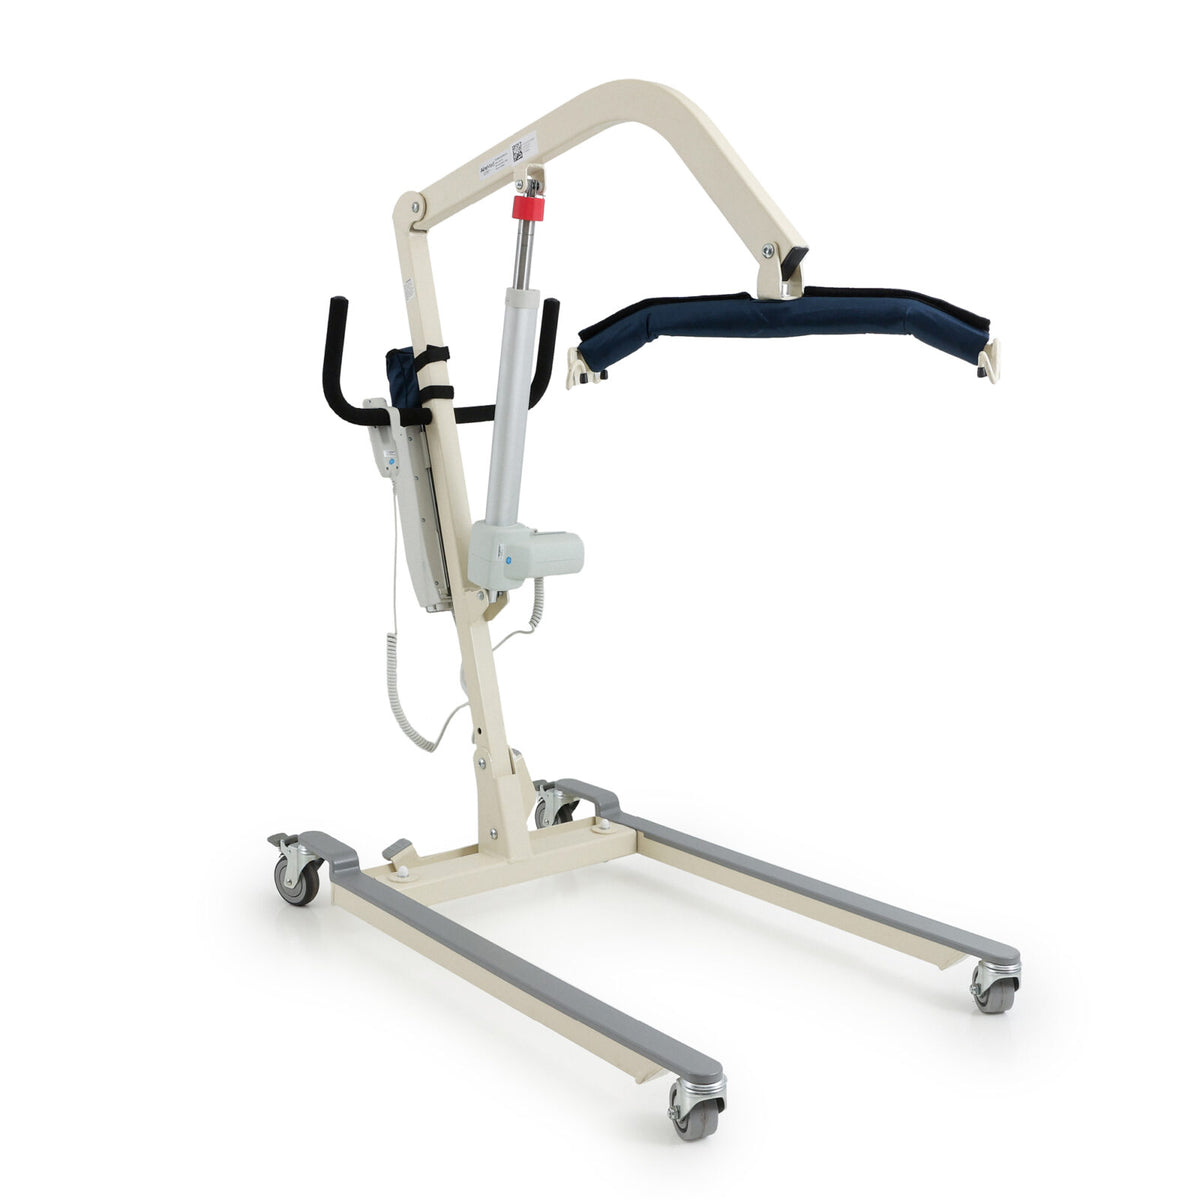 AireMed Electric Patient Lift – Foldable Lift With Low Base w Free Sling!